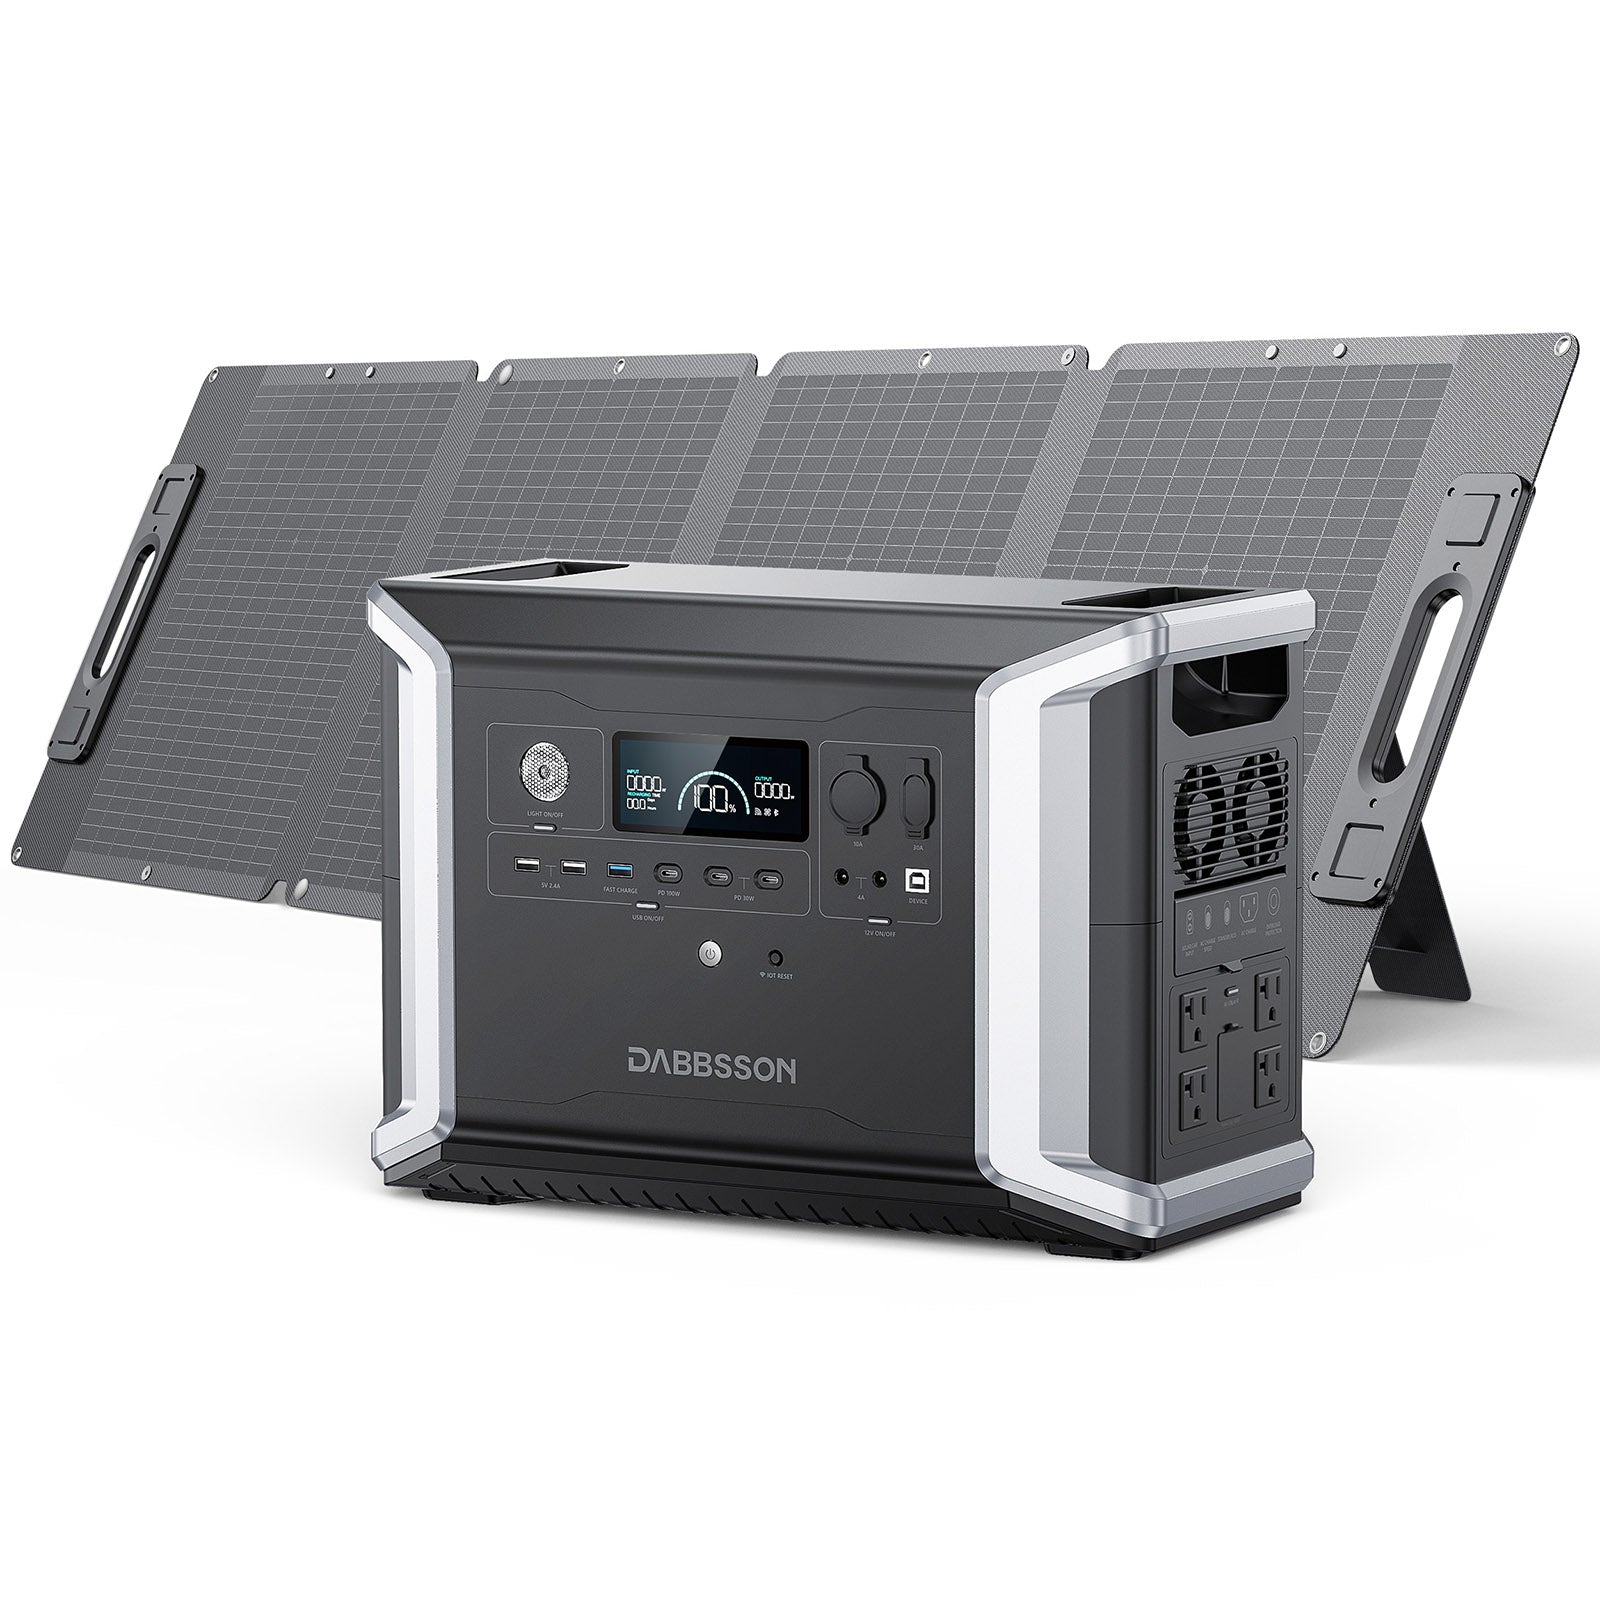 Home Backup Power Station with DBS3000B Expandable battery | 5330Wh